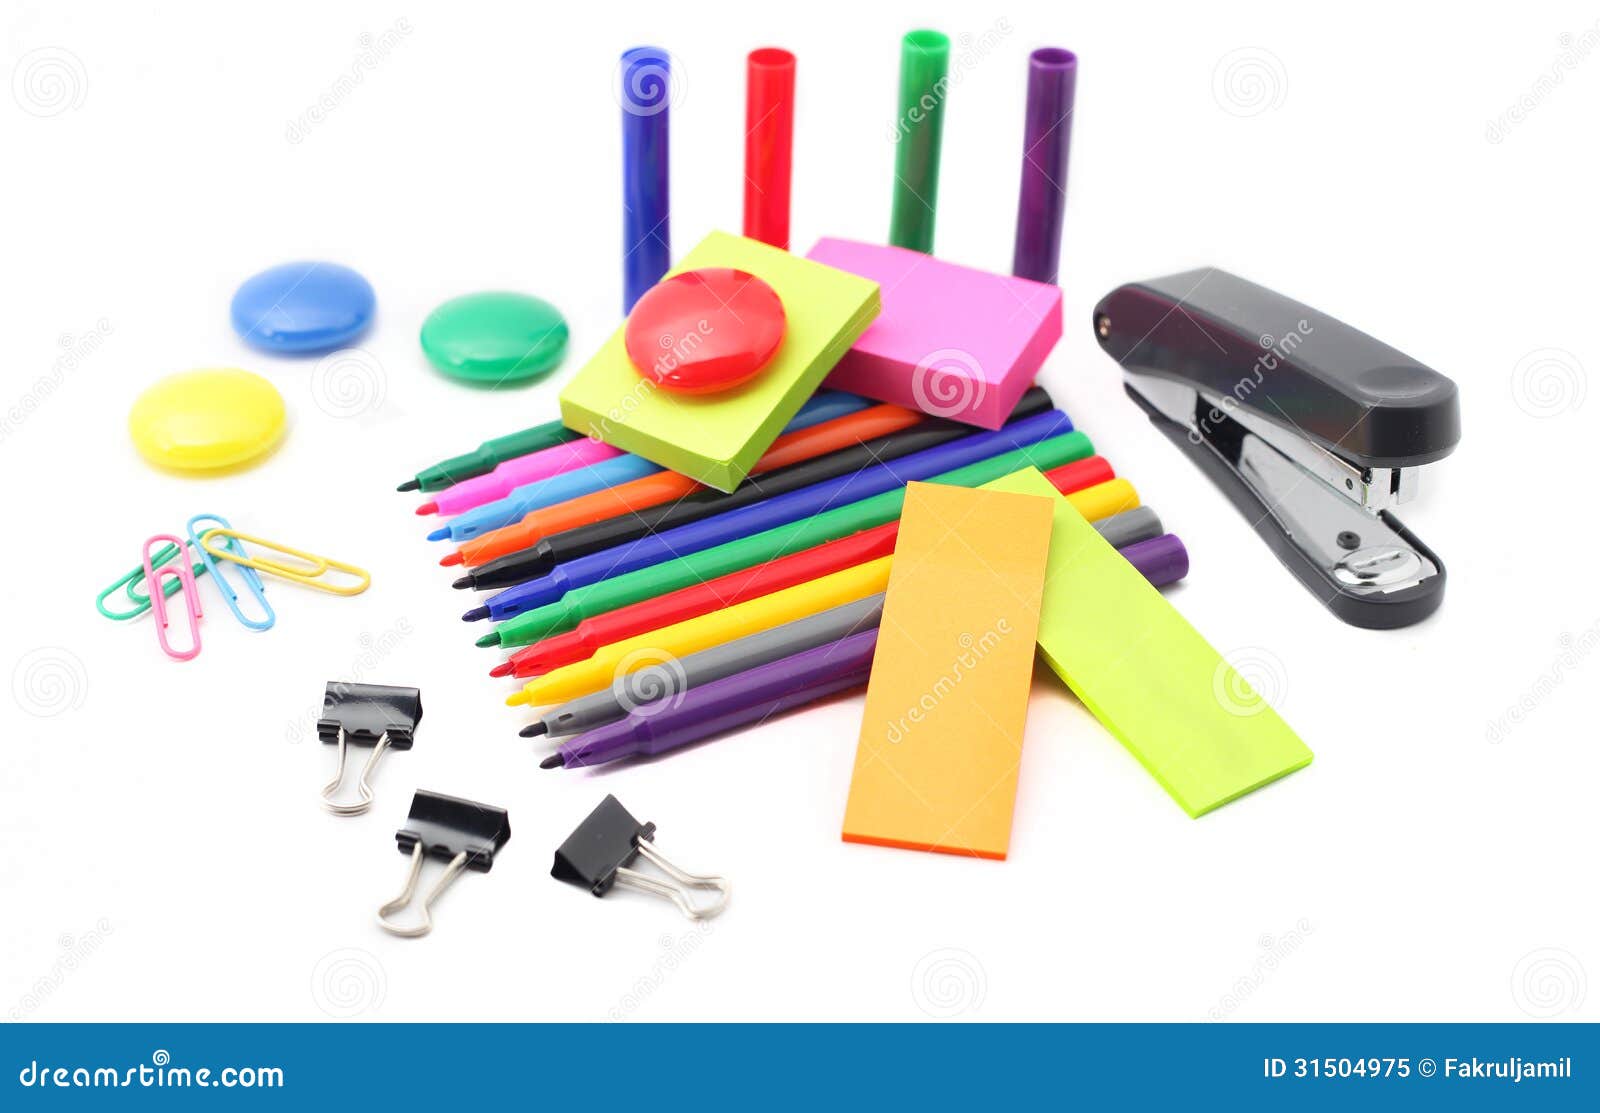 free clipart images office supplies - photo #28